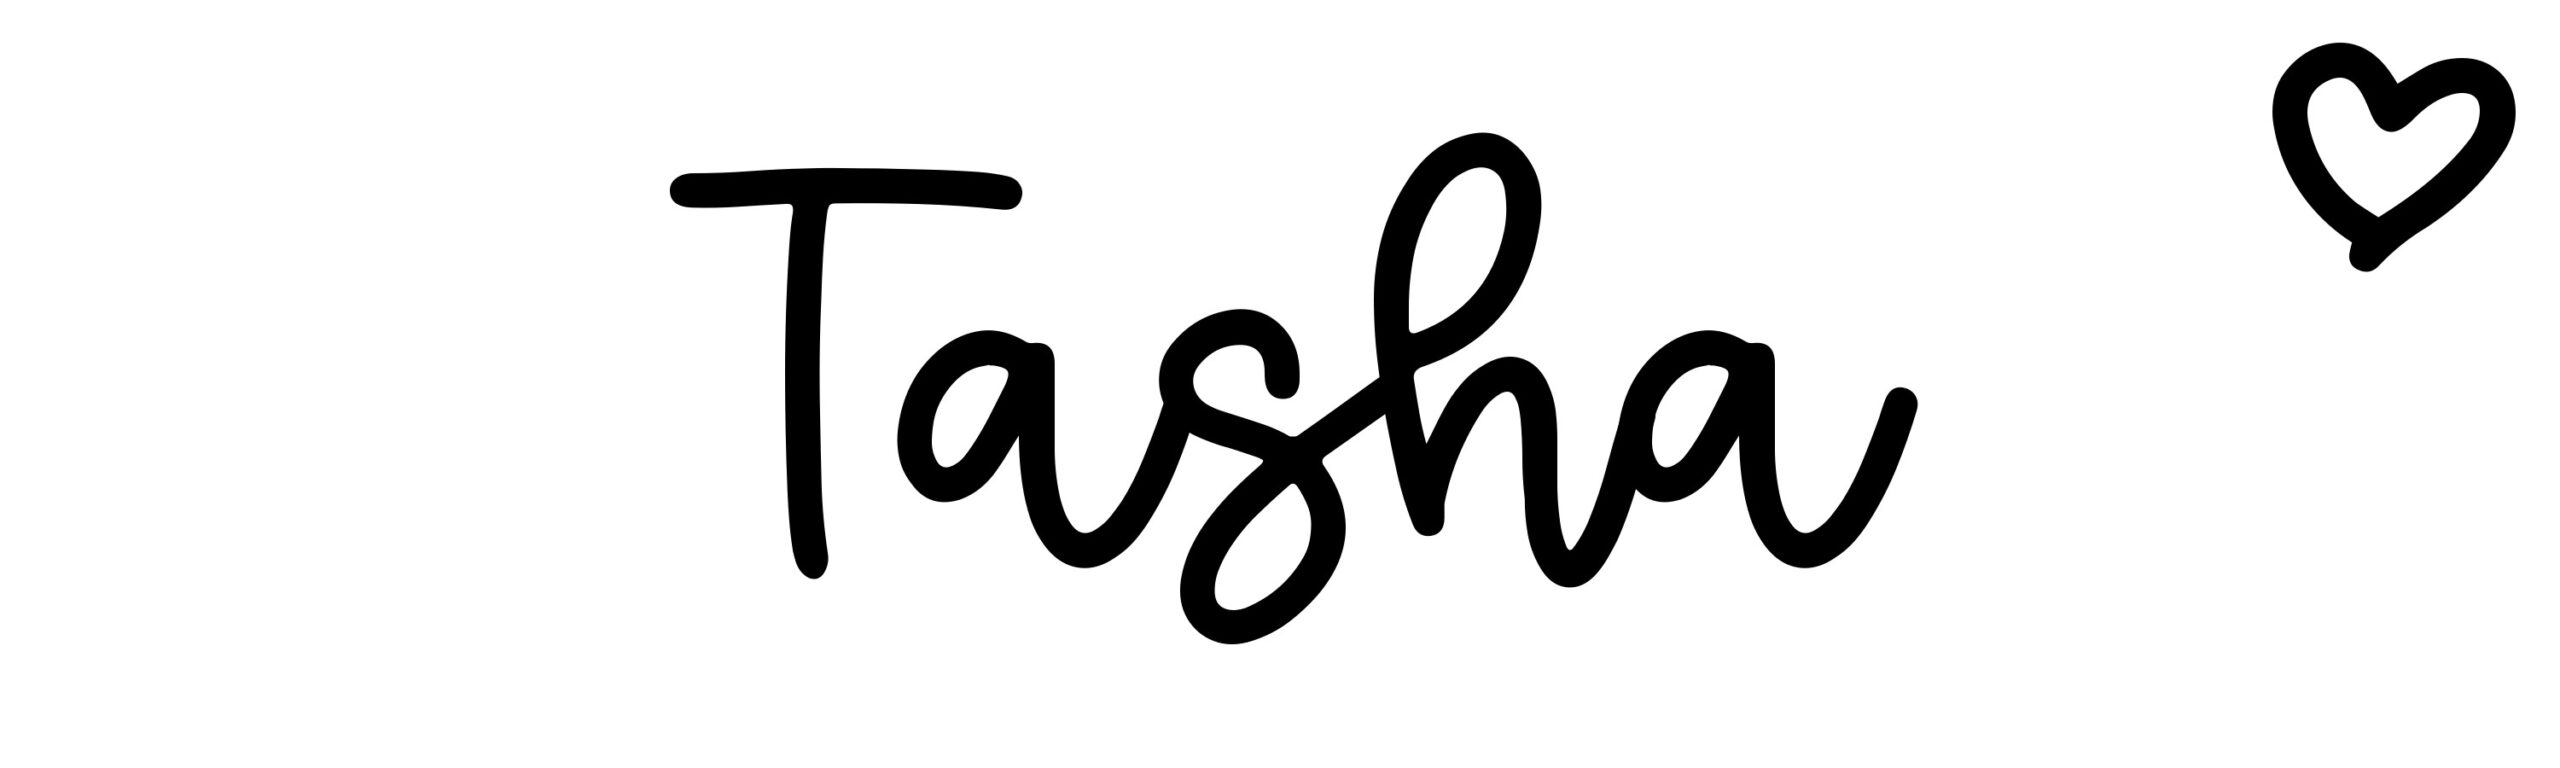 Tasha - Name meaning, origin, variations and more